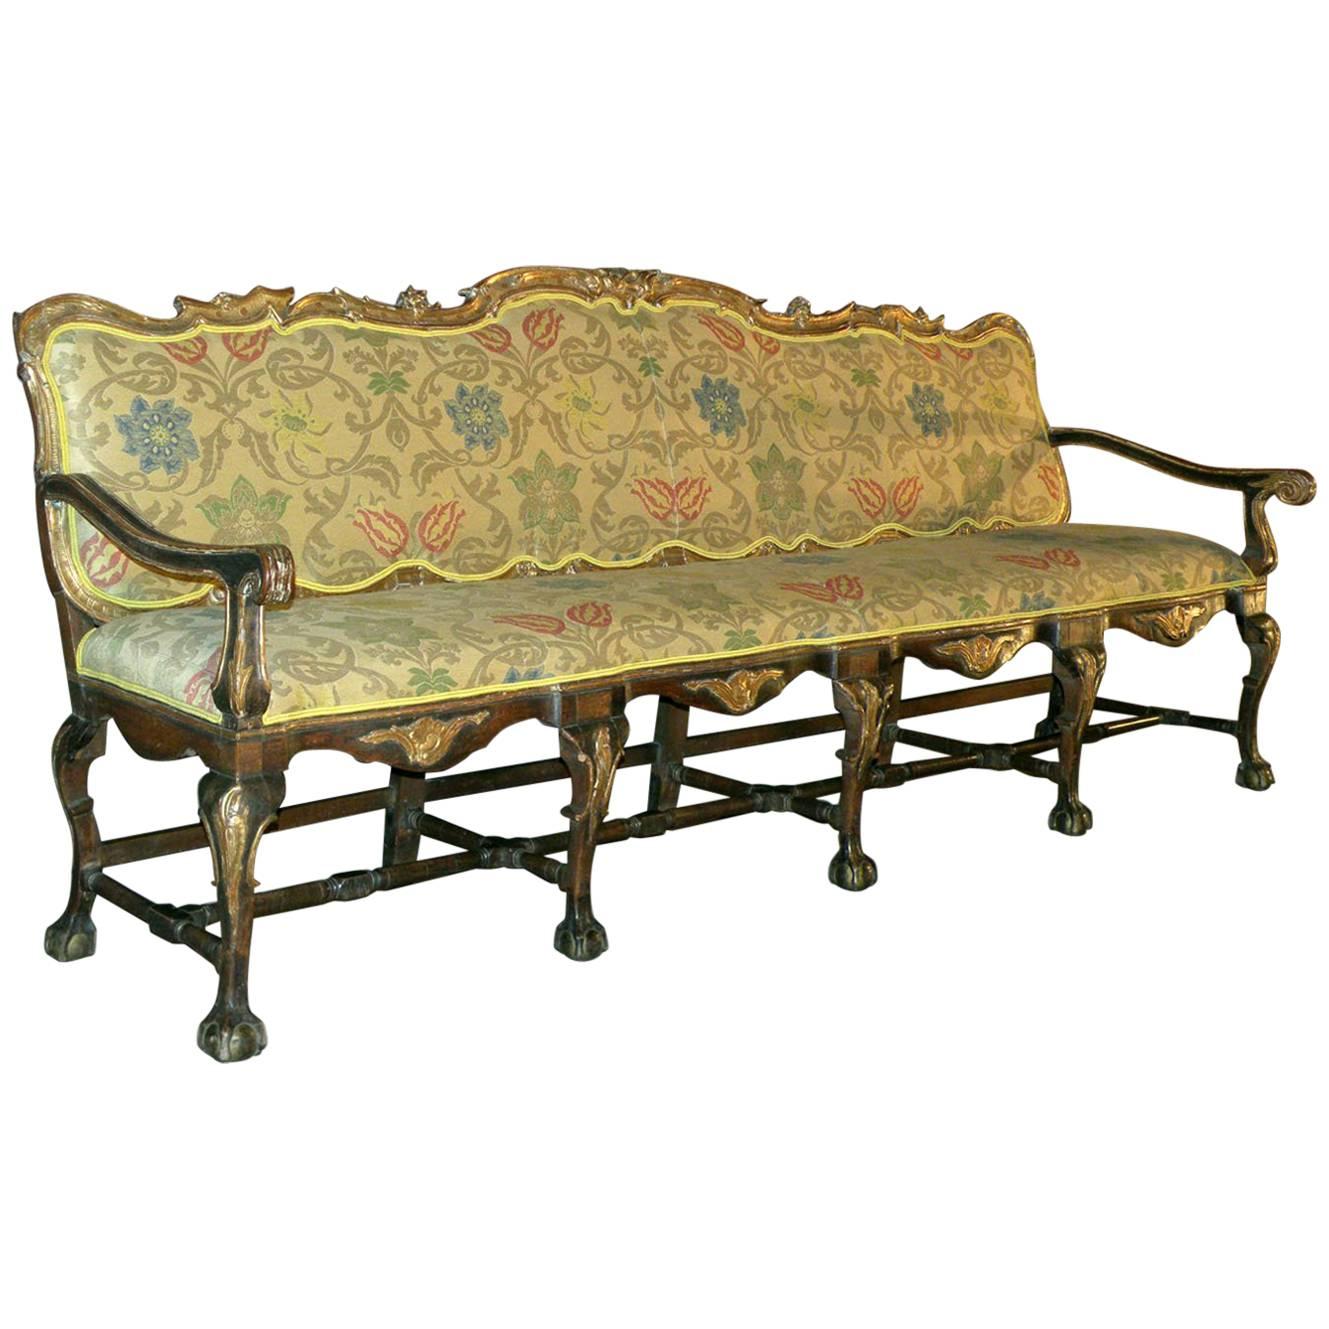 Long 18th Century Carved and Parcel-Gilt Spanish / Portuguese Settee For Sale